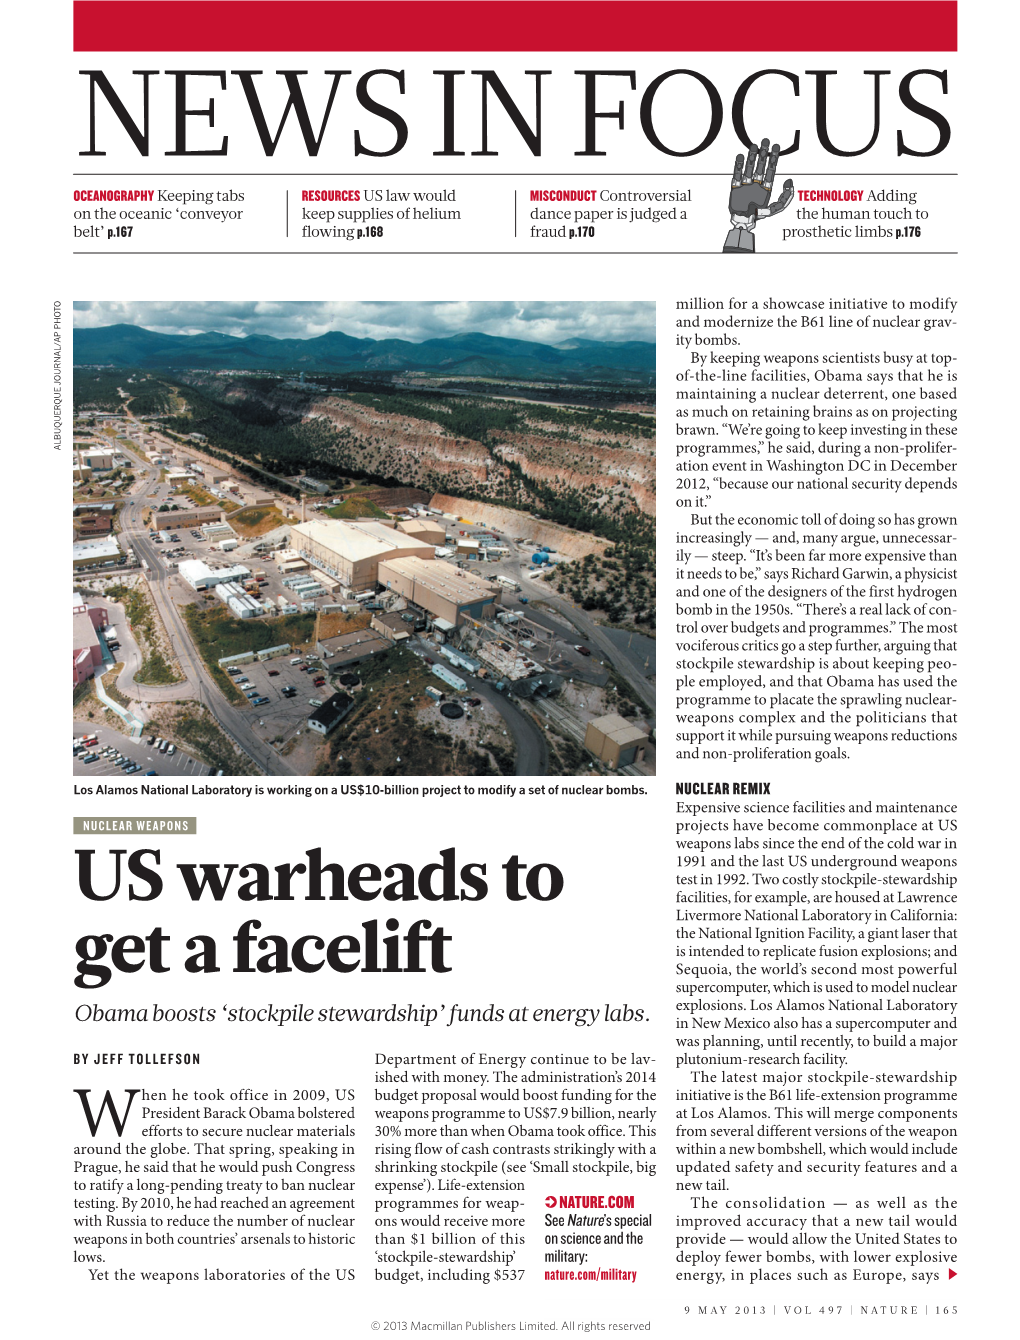 US Warheads to Get a Facelift